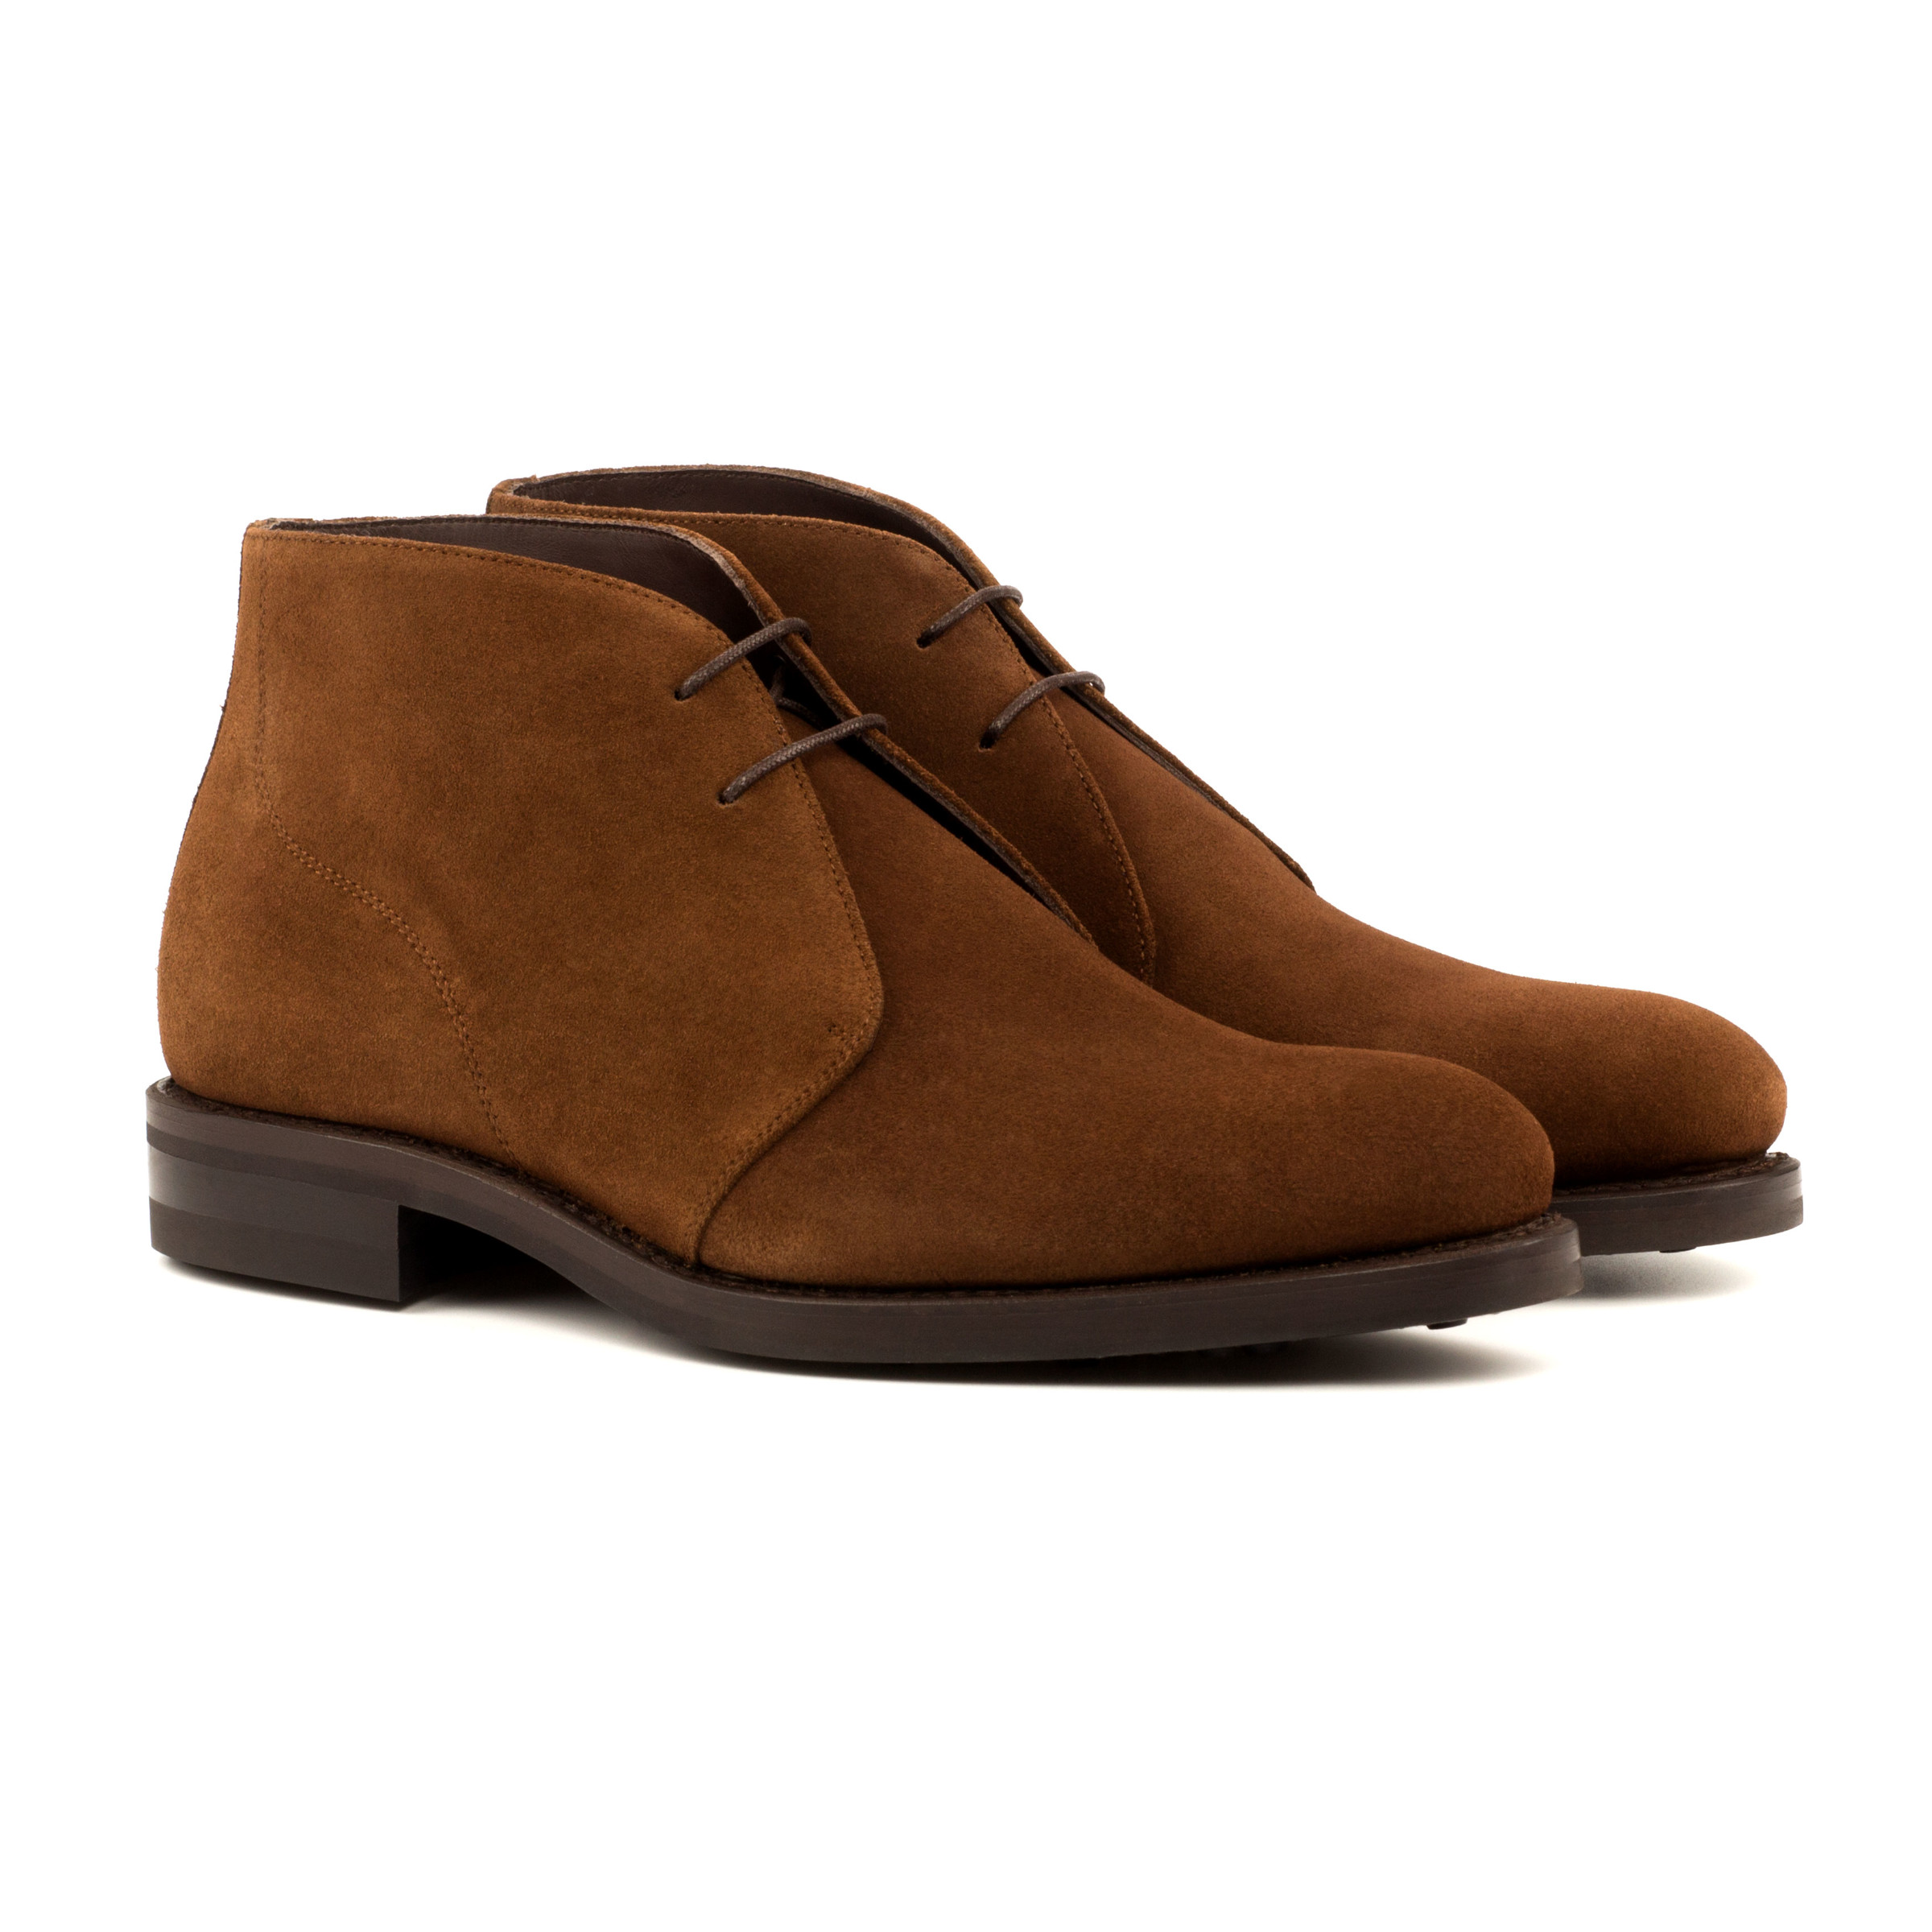 The Arborist: Brown Suede. Front side facing view of med brown lux suede ankle style leather boots with laces on a white background